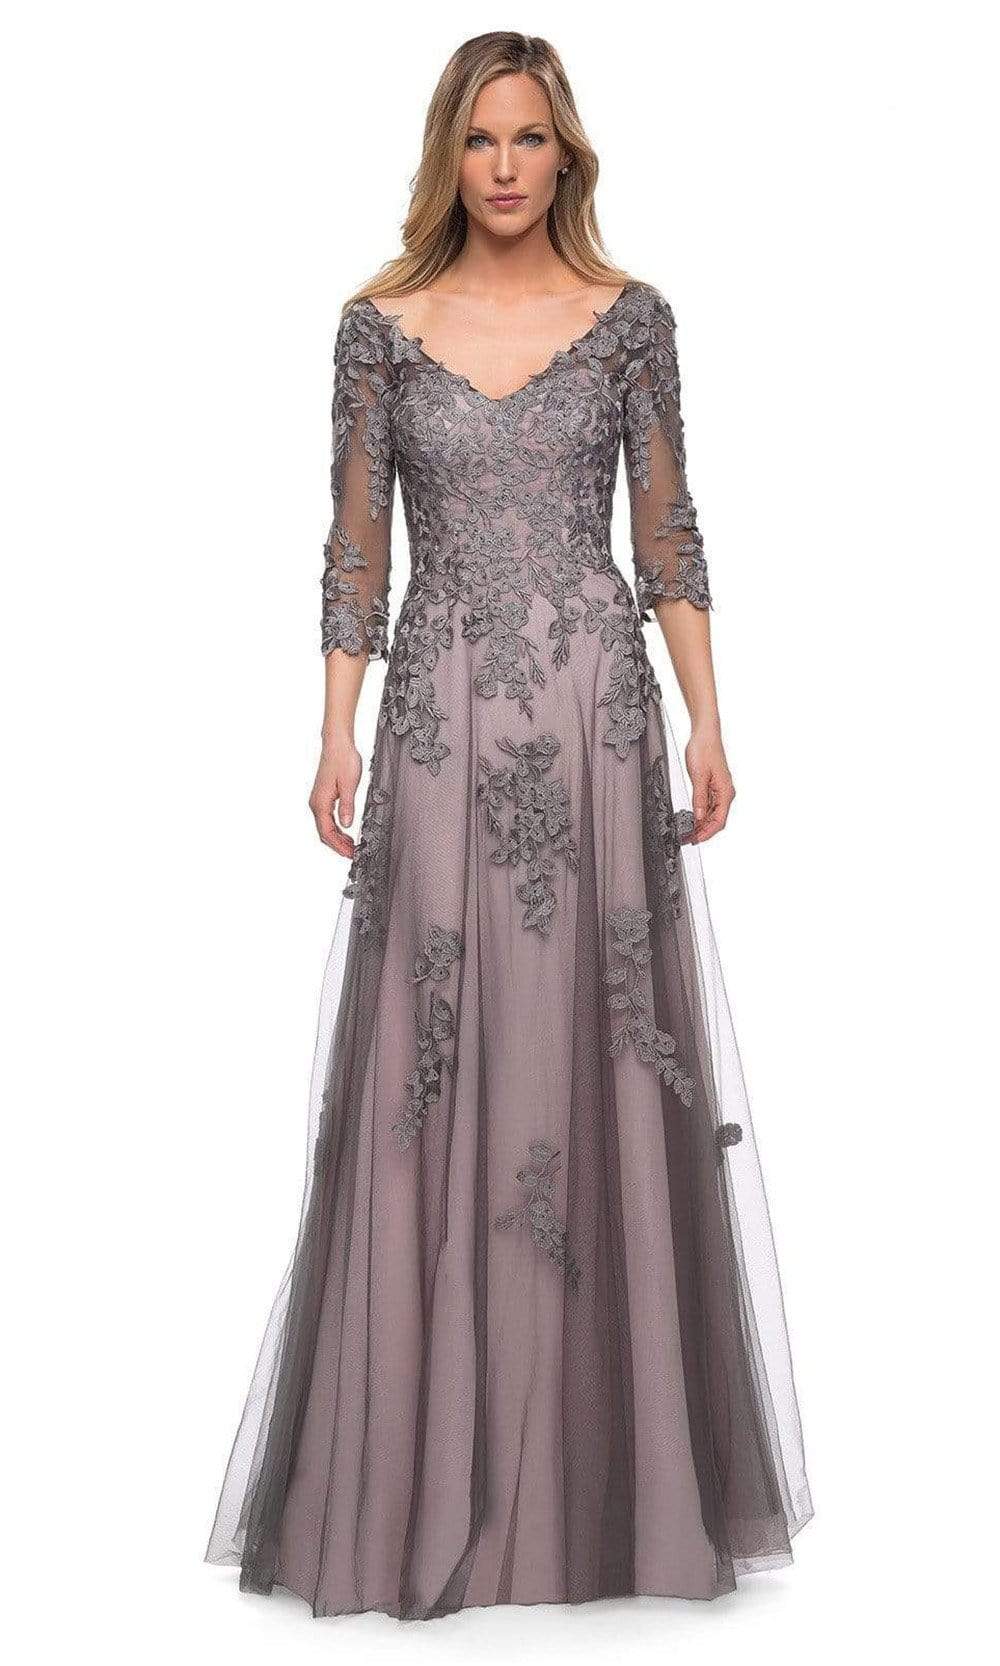 La Femme - 29205 Floral Embroidered A-line Gown Mother of the Bride Dresses 2 / Pink/Gray